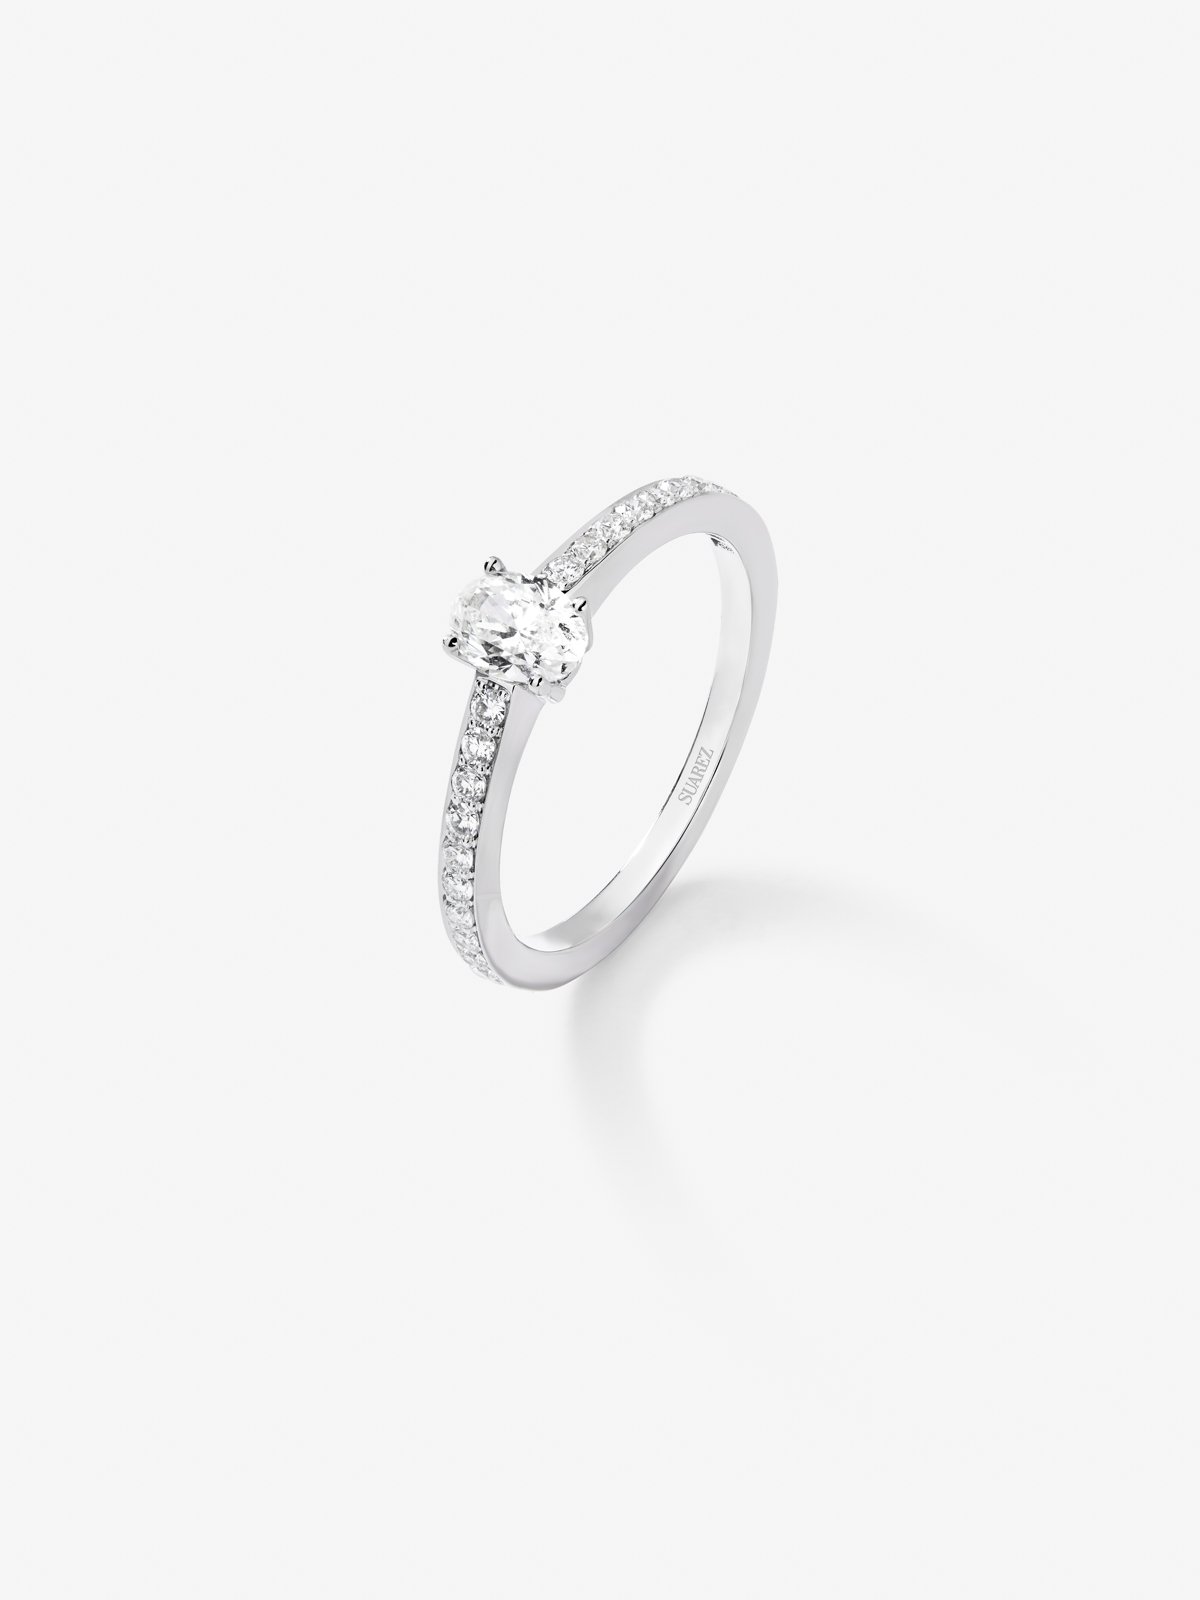 18K white gold ring with white and bright white diamonds of 0.61 cts